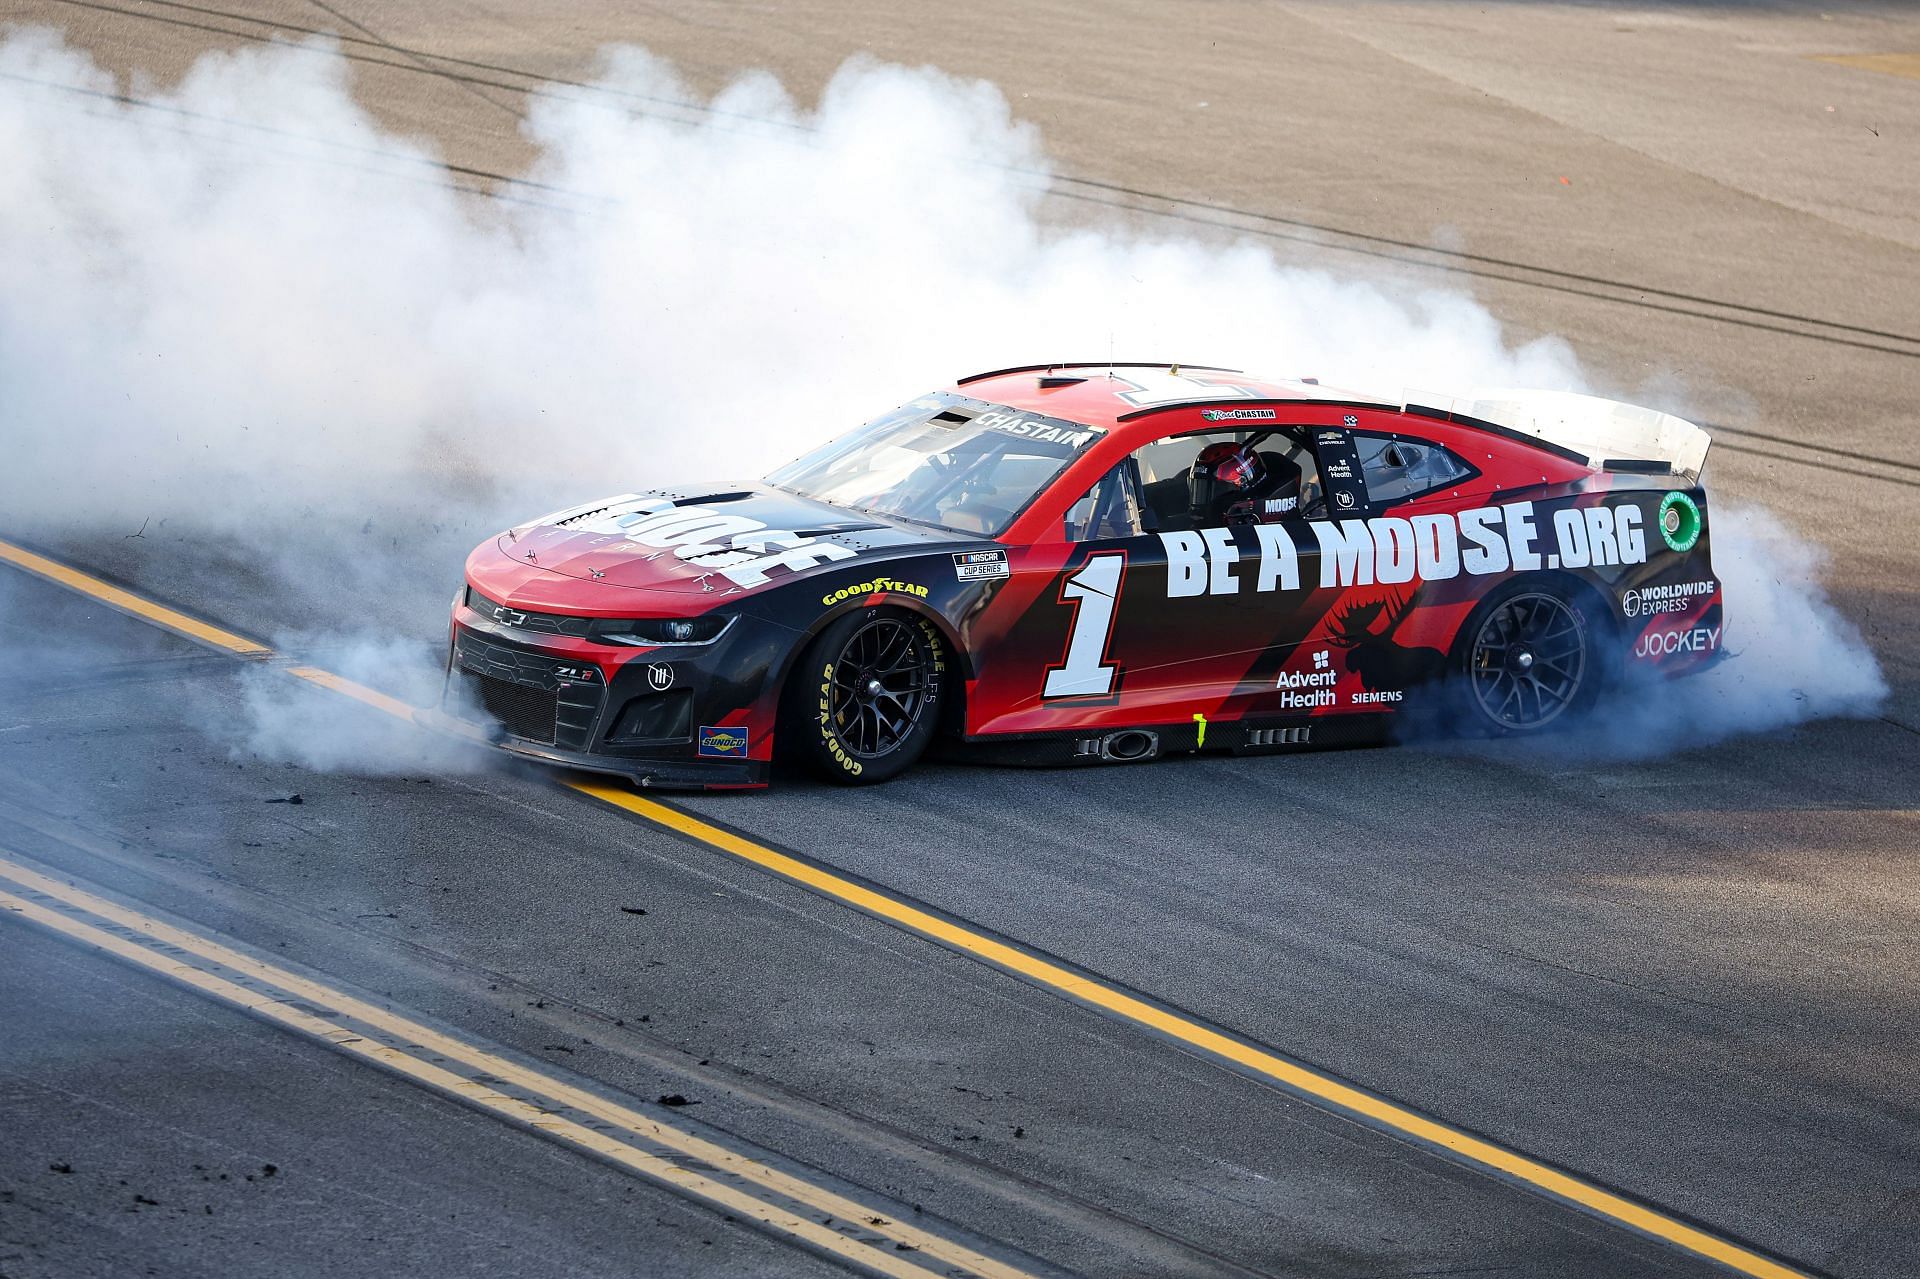 Ross Chastain celebrates with a burnout after winning the NASCAR Cup Series GEICO 500 at Talladega Superspeedway. (Photo by James Gilbert/Getty Images)